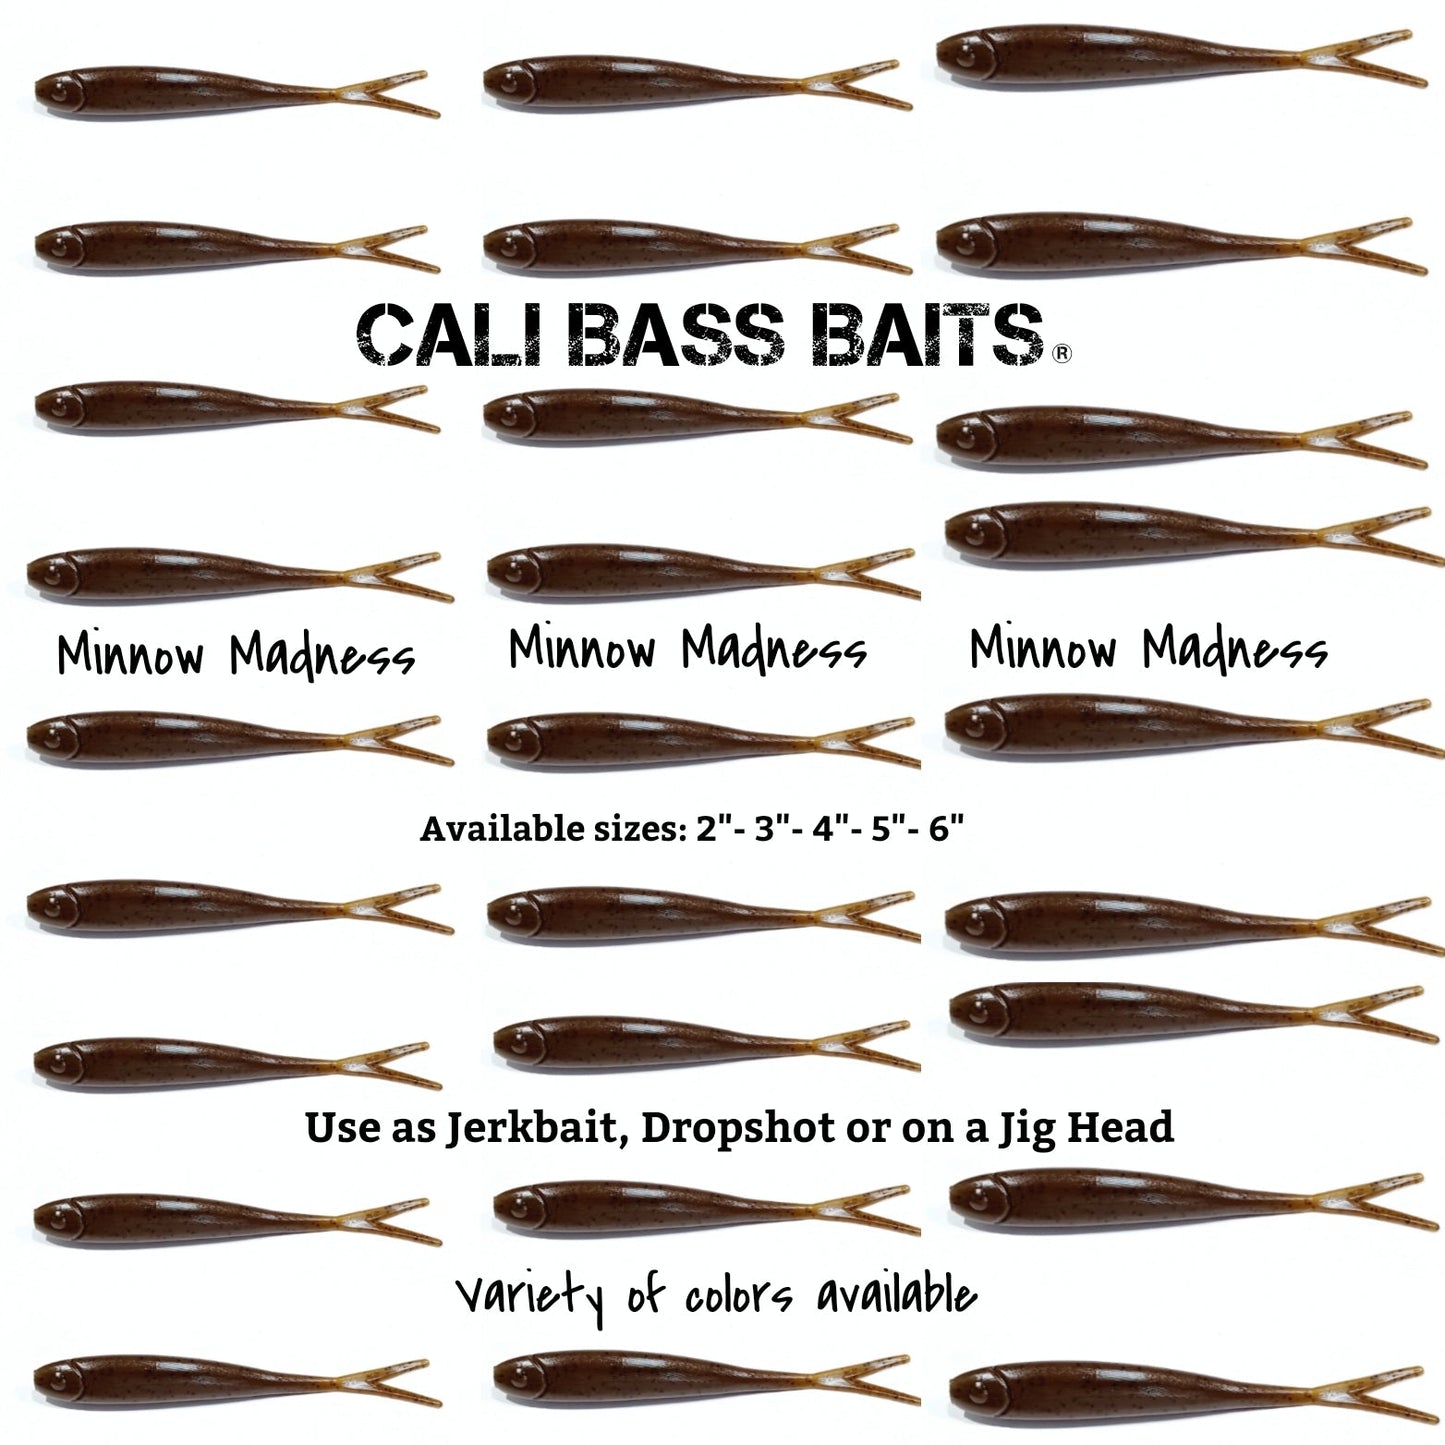 New! Minnow Madness (BIG SIZE 6" inch bait) Great for Dropshot, Jerkbait and Swimbait set ups